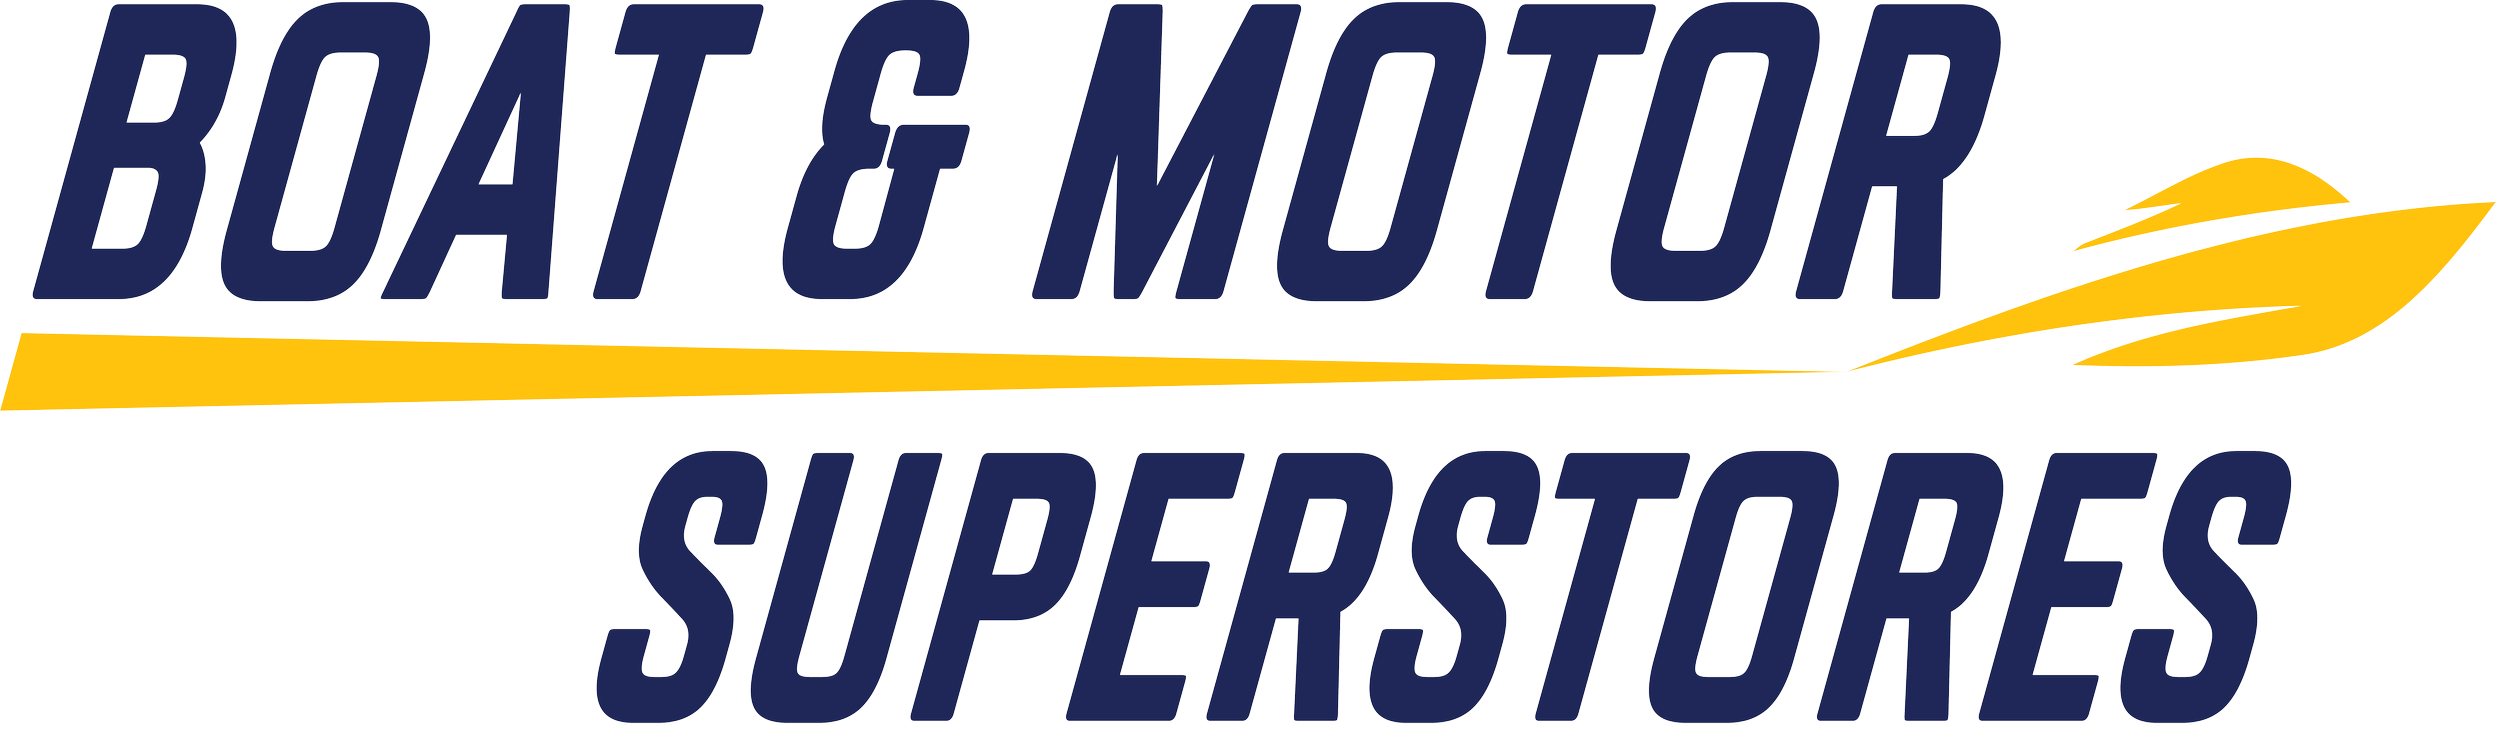 Boat and Motor Superstores Logo 1 (2) (3).png